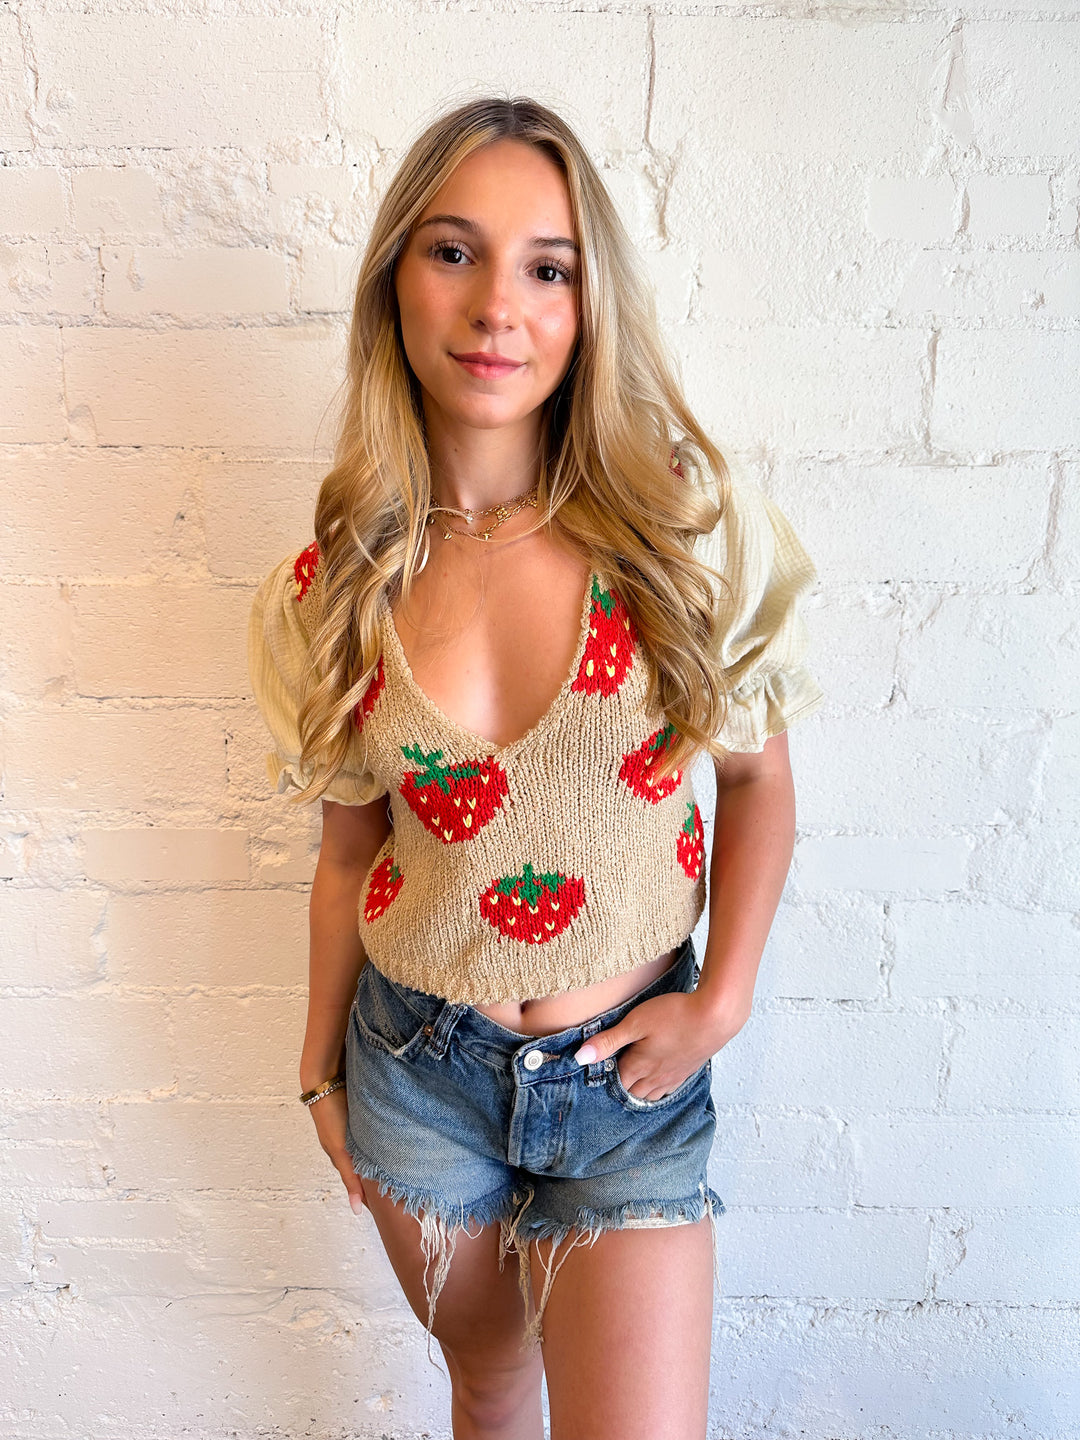 Free People Strawberry Jam Mixed Media Cropped Sweater, Tops, Free People, Adeline, dallas boutique, dallas texas, texas boutique, women's boutique dallas, adeline boutique, dallas boutique, trendy boutique, affordable boutique